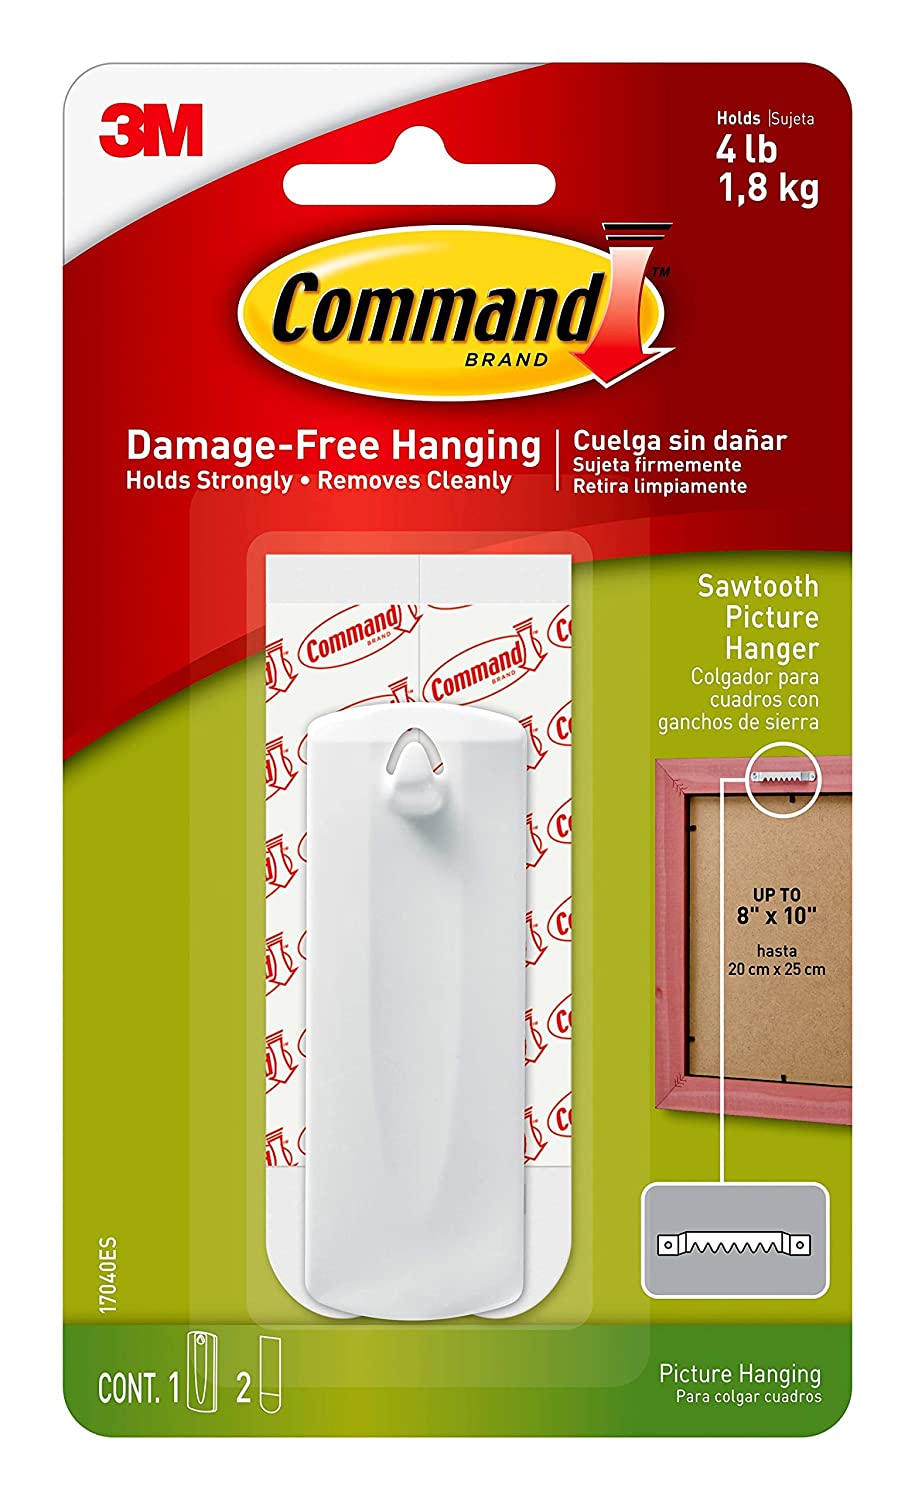 Detec™ 3M Command Saw tooth Hanger Pack of 40